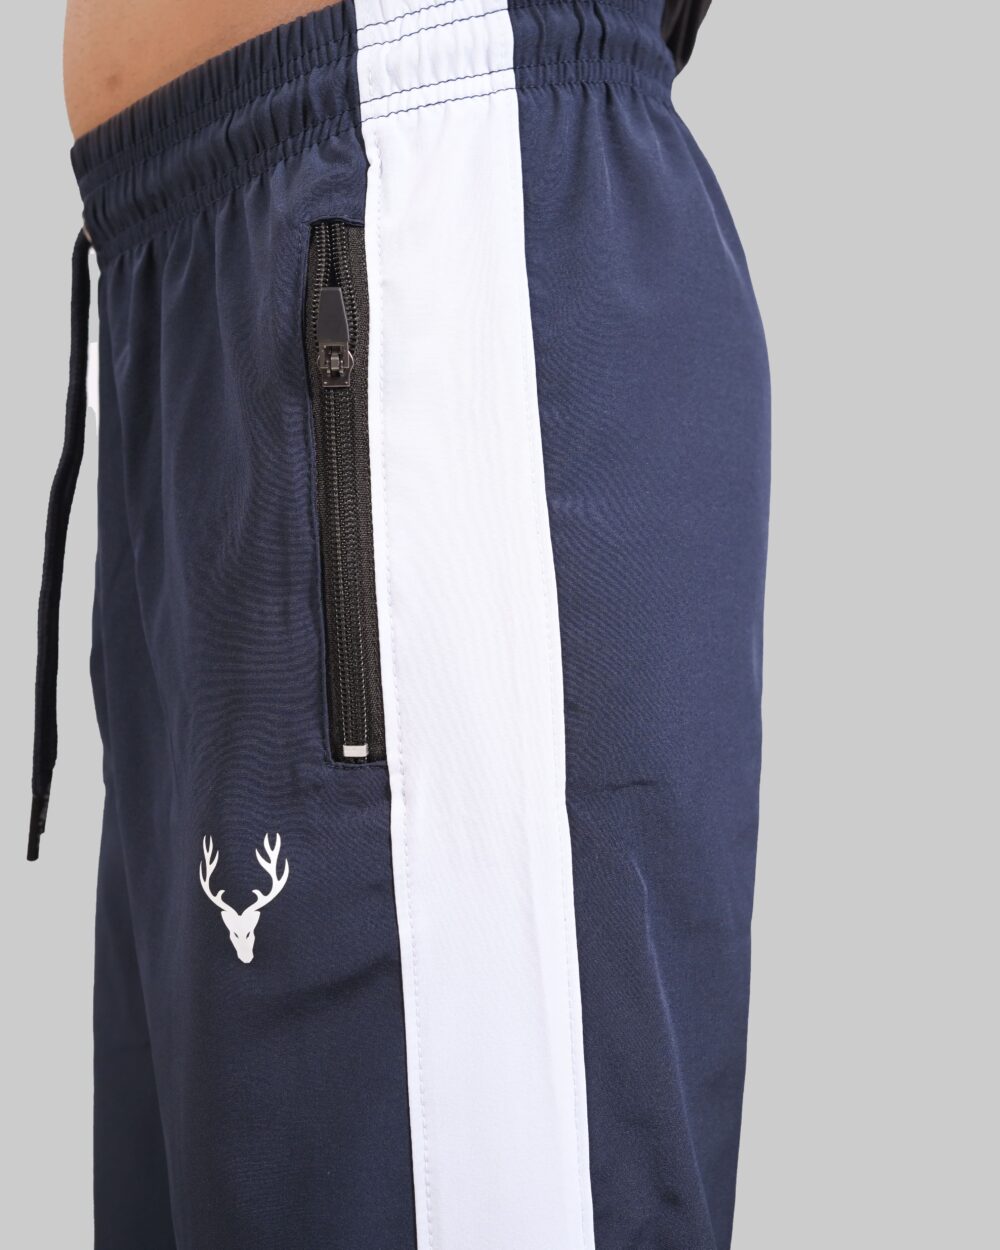 SG Loose Fit Trouser 2.0 (NAVY BLUE & WHITE) - Stag Clothing 